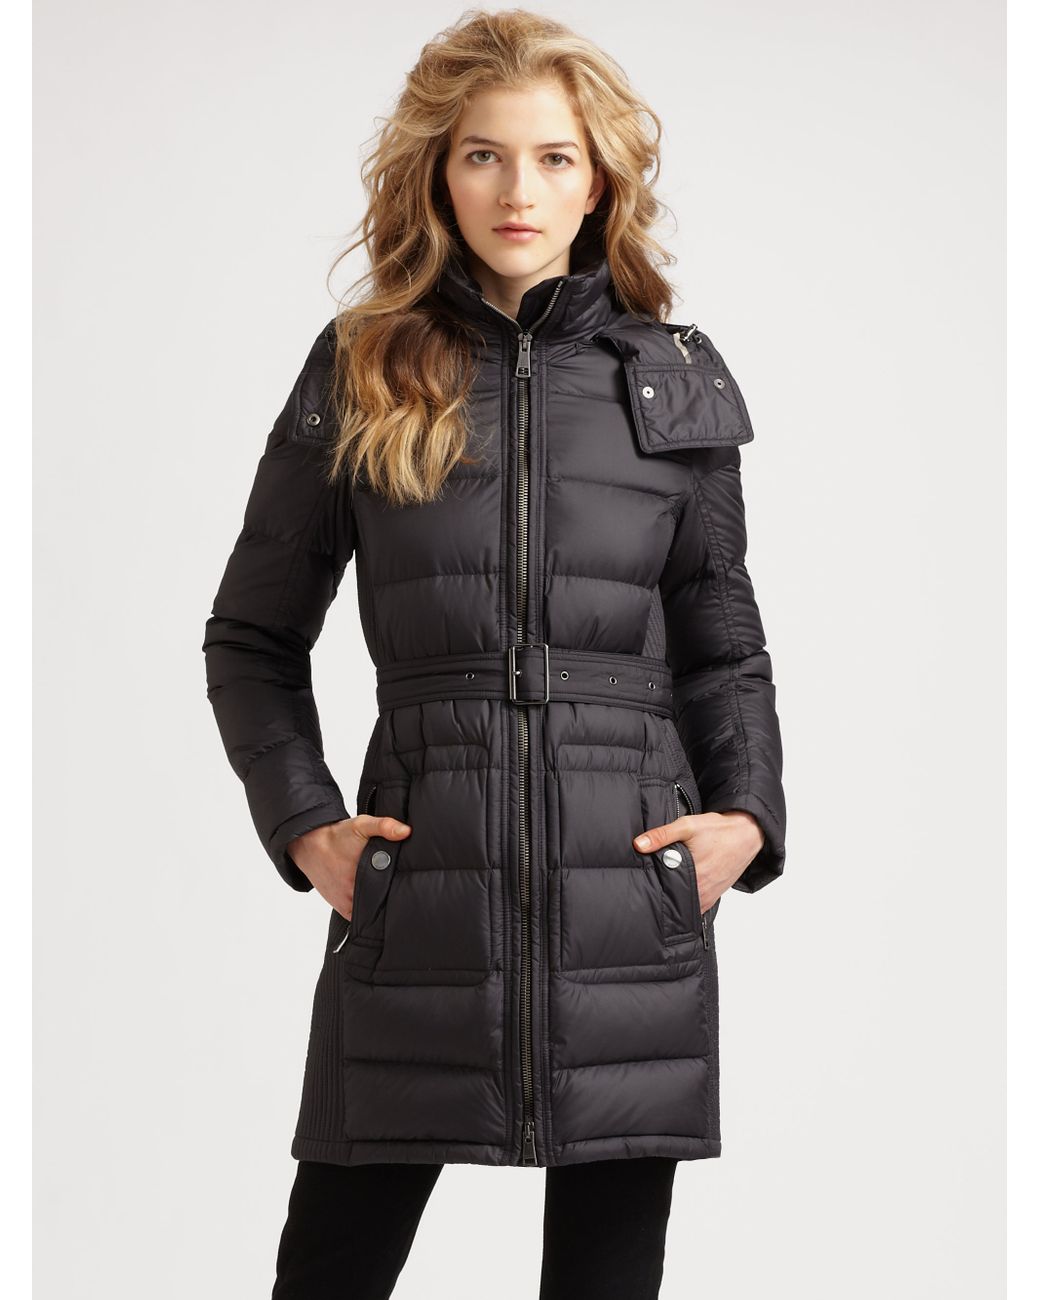 Burberry Brit Quilted Buckle Belt Puffer Coat in Black (Gray) | Lyst